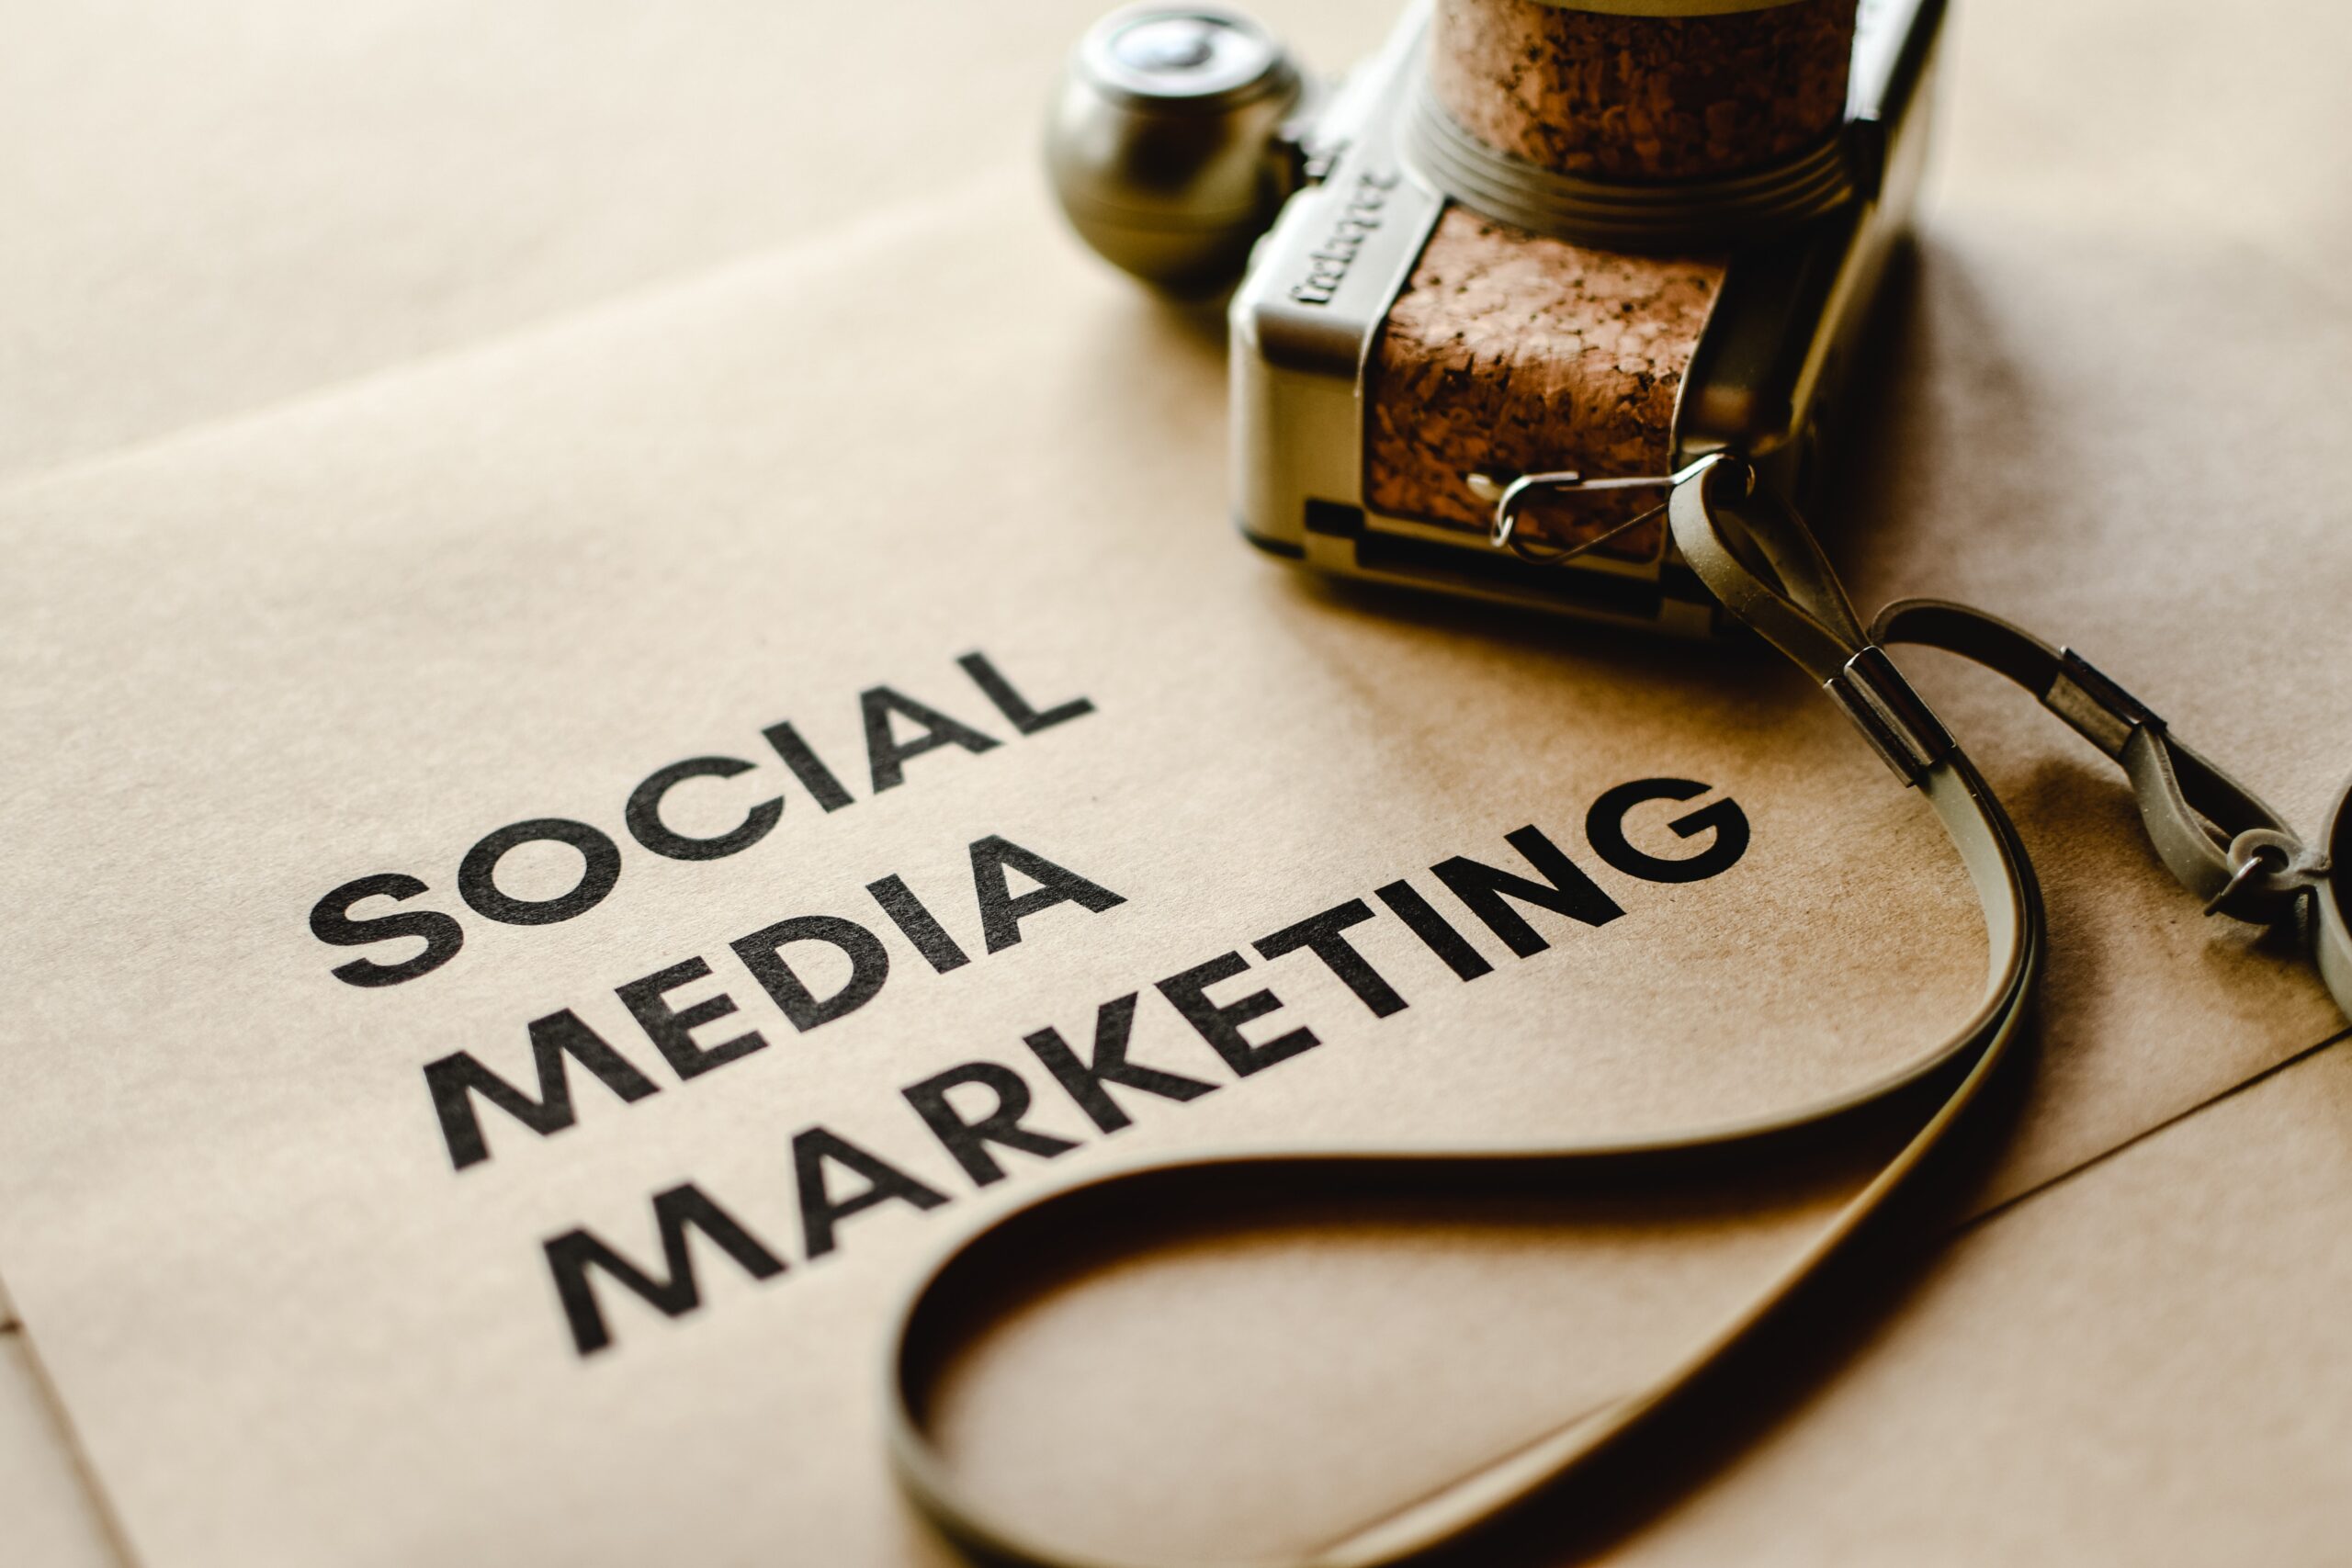 Importance of Social Media Marketing for Businesses